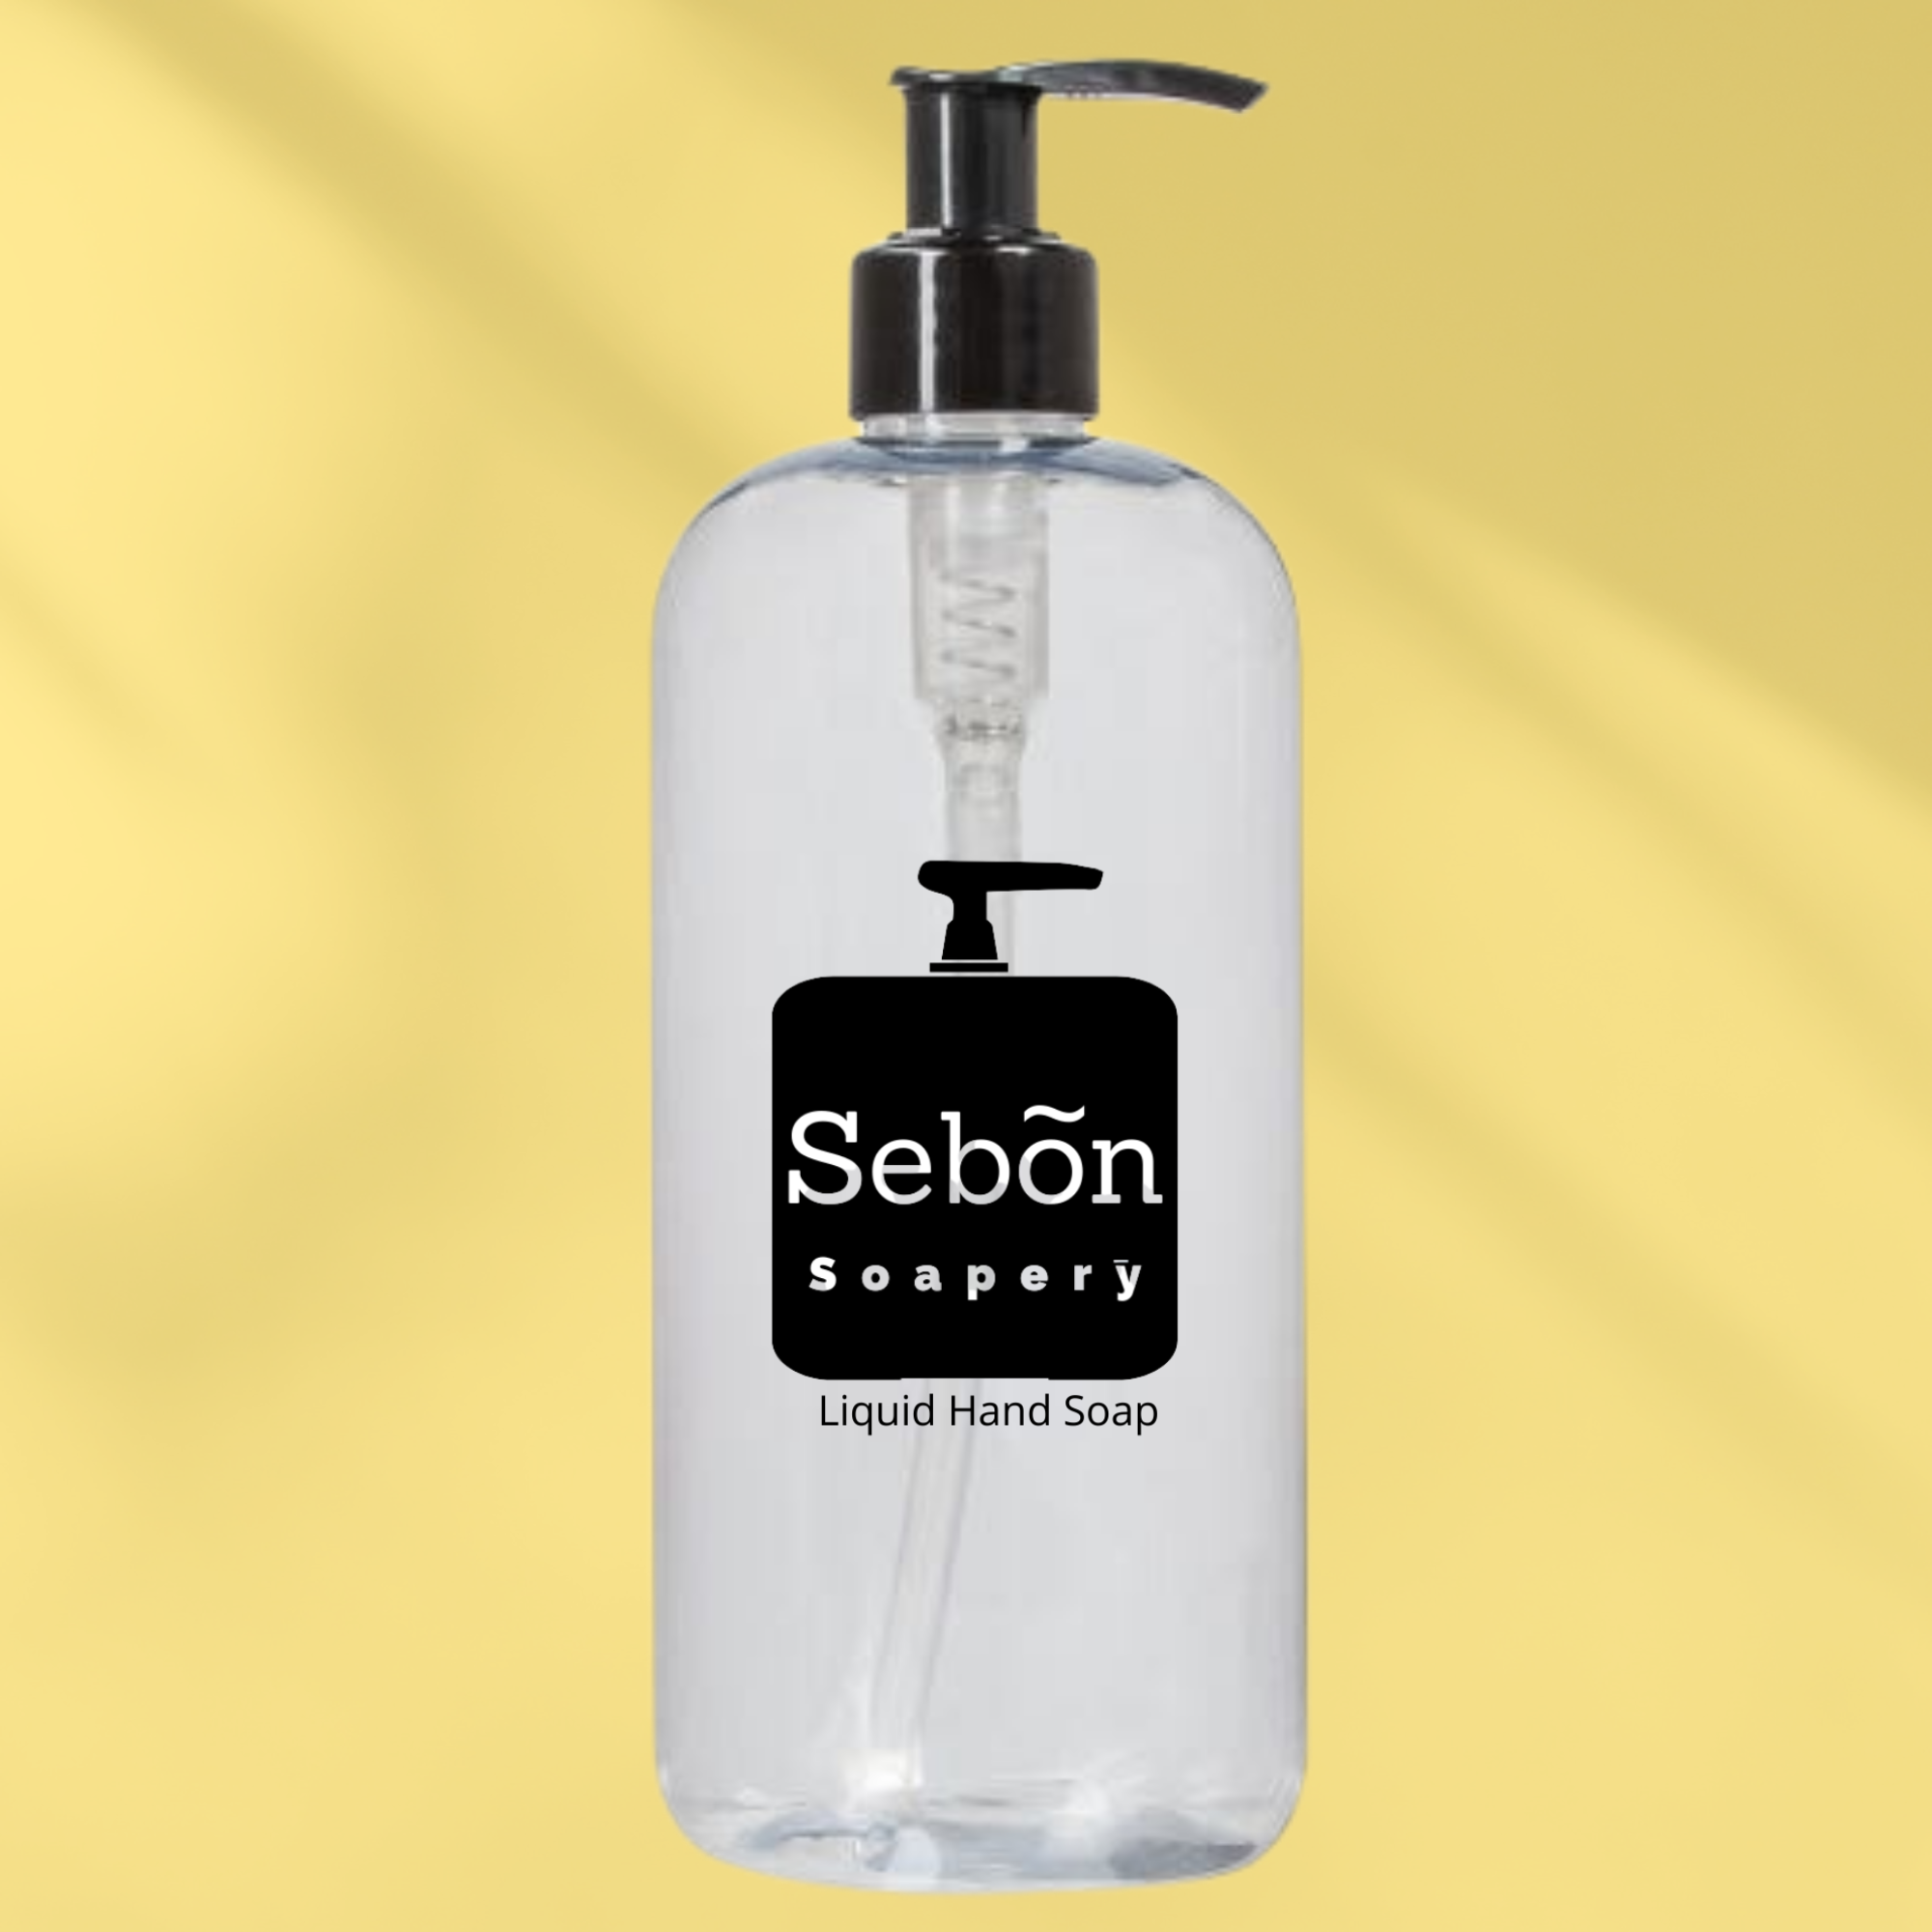 Sebon Chocolate Chip Cookie Scented Liquid Hand Soap with Olive Oil